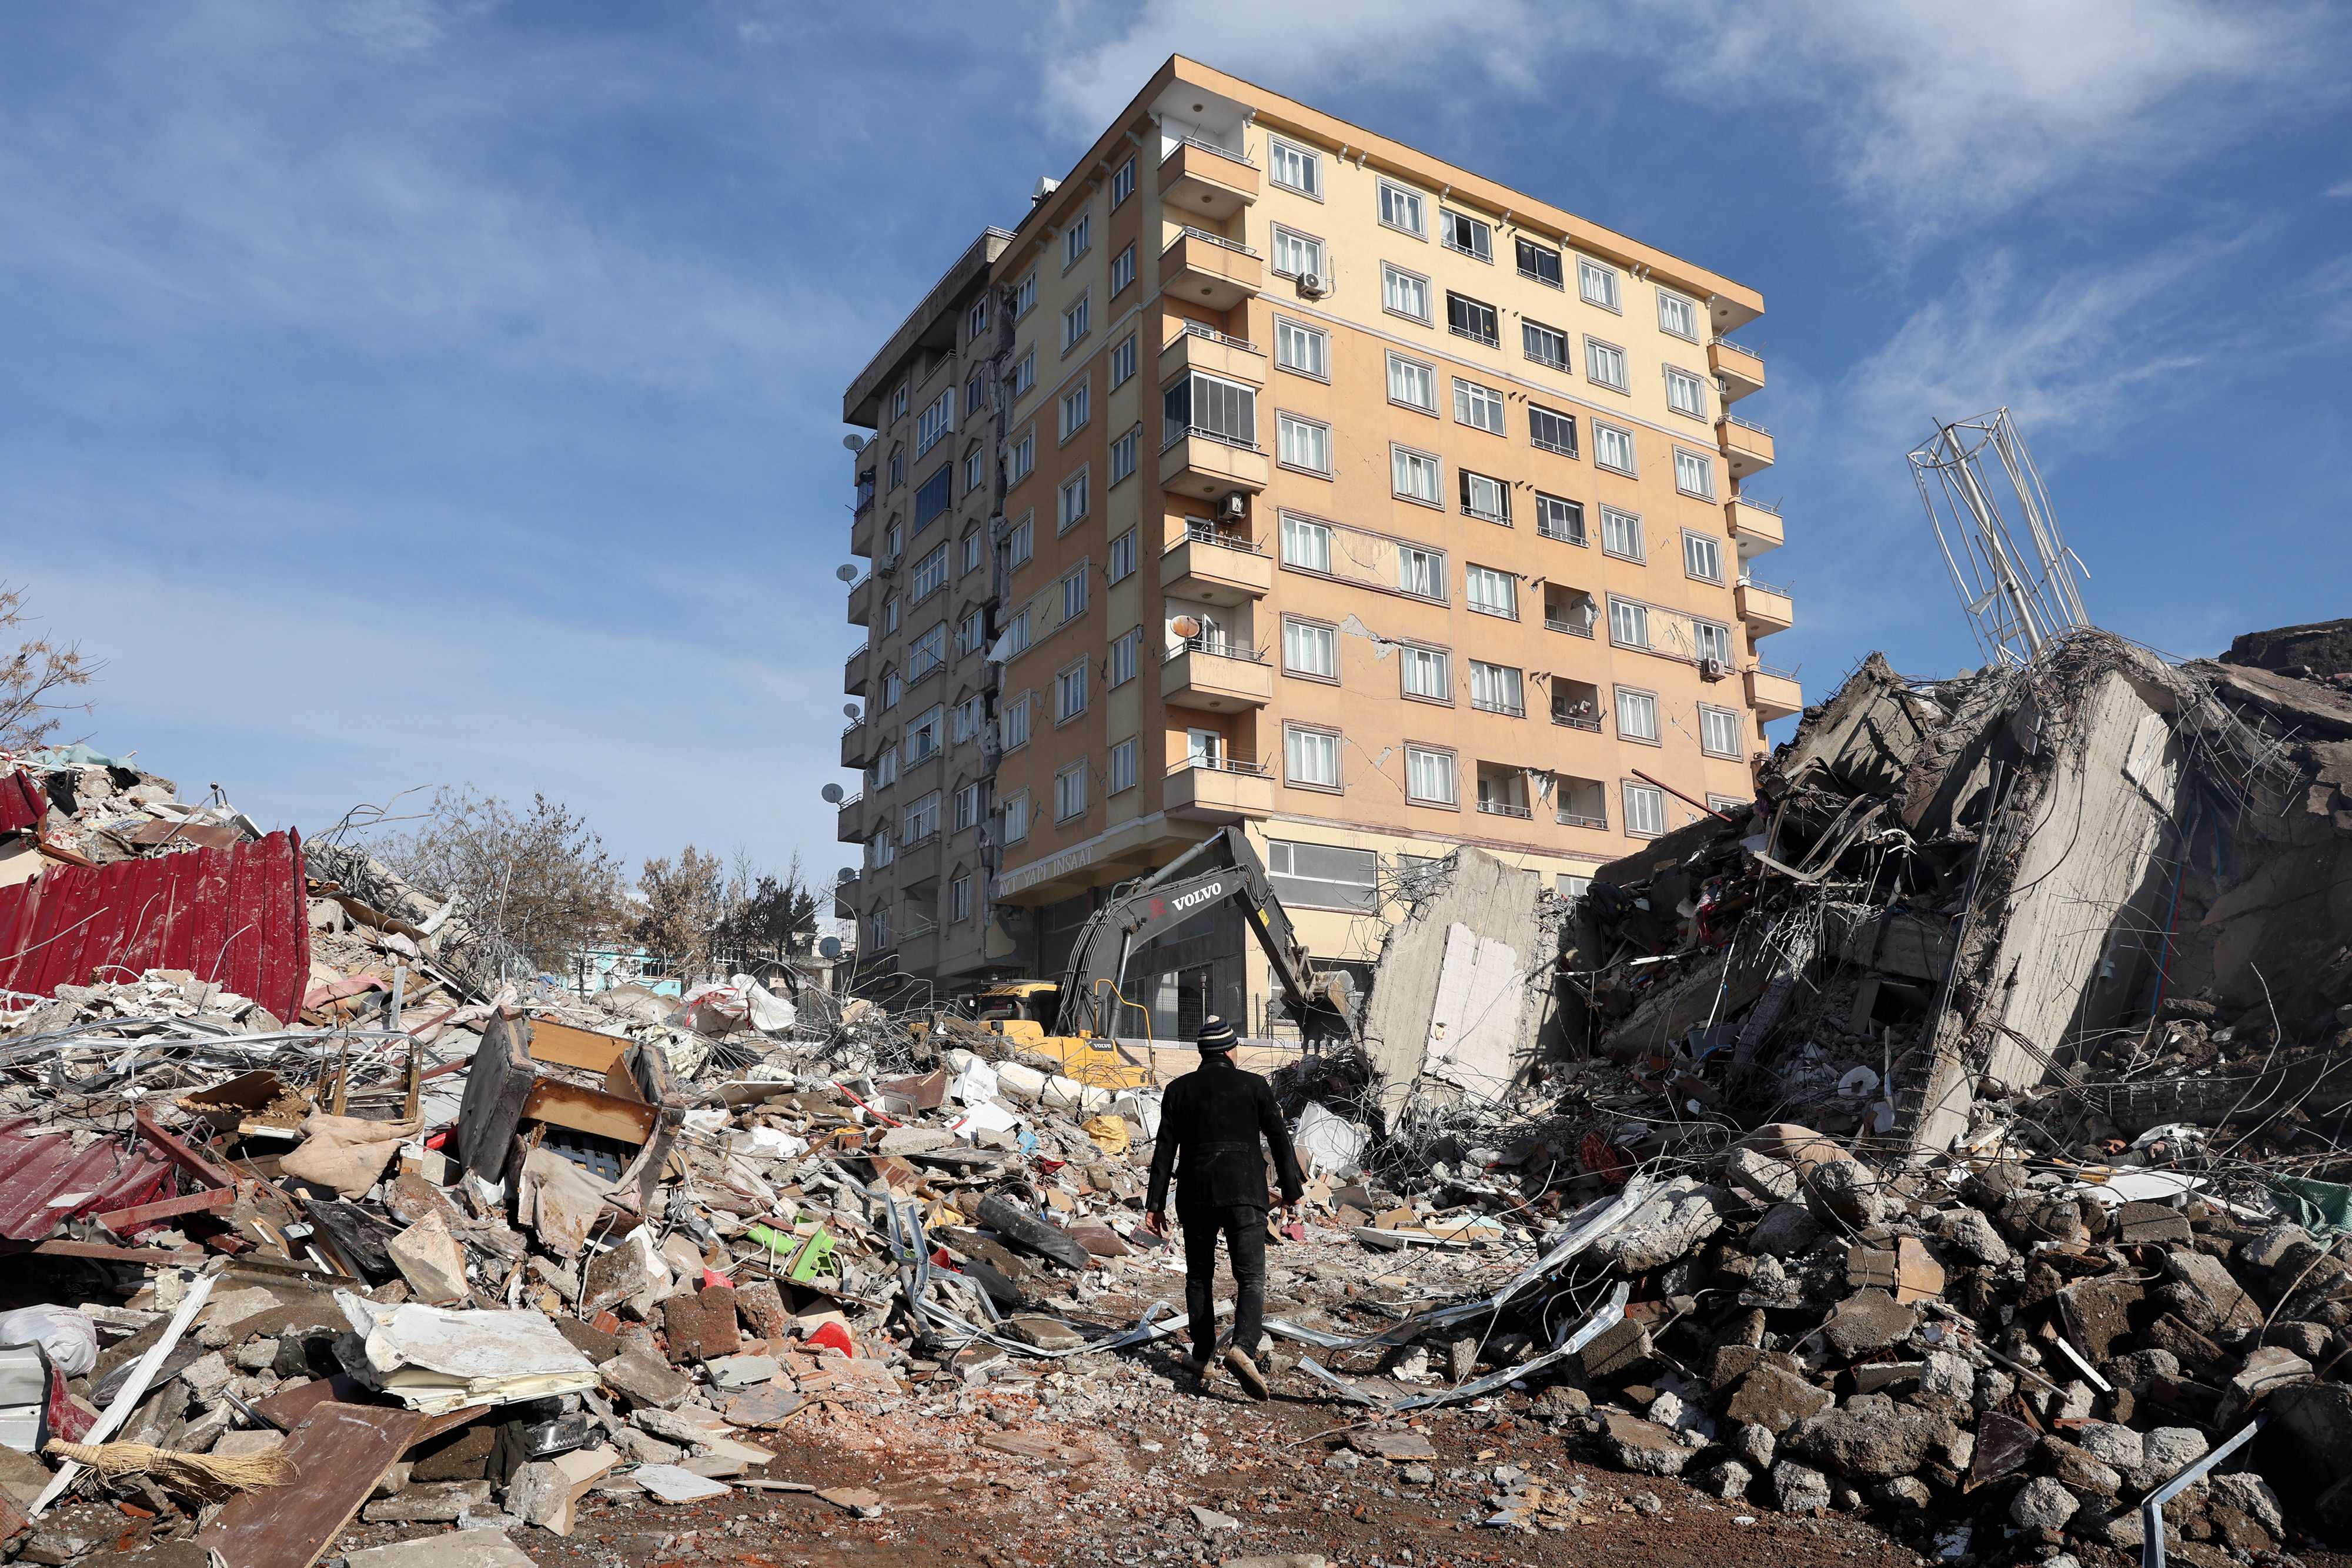 A man walks across the rubble of collapsed building towards a building still standing in Kahramanmaras